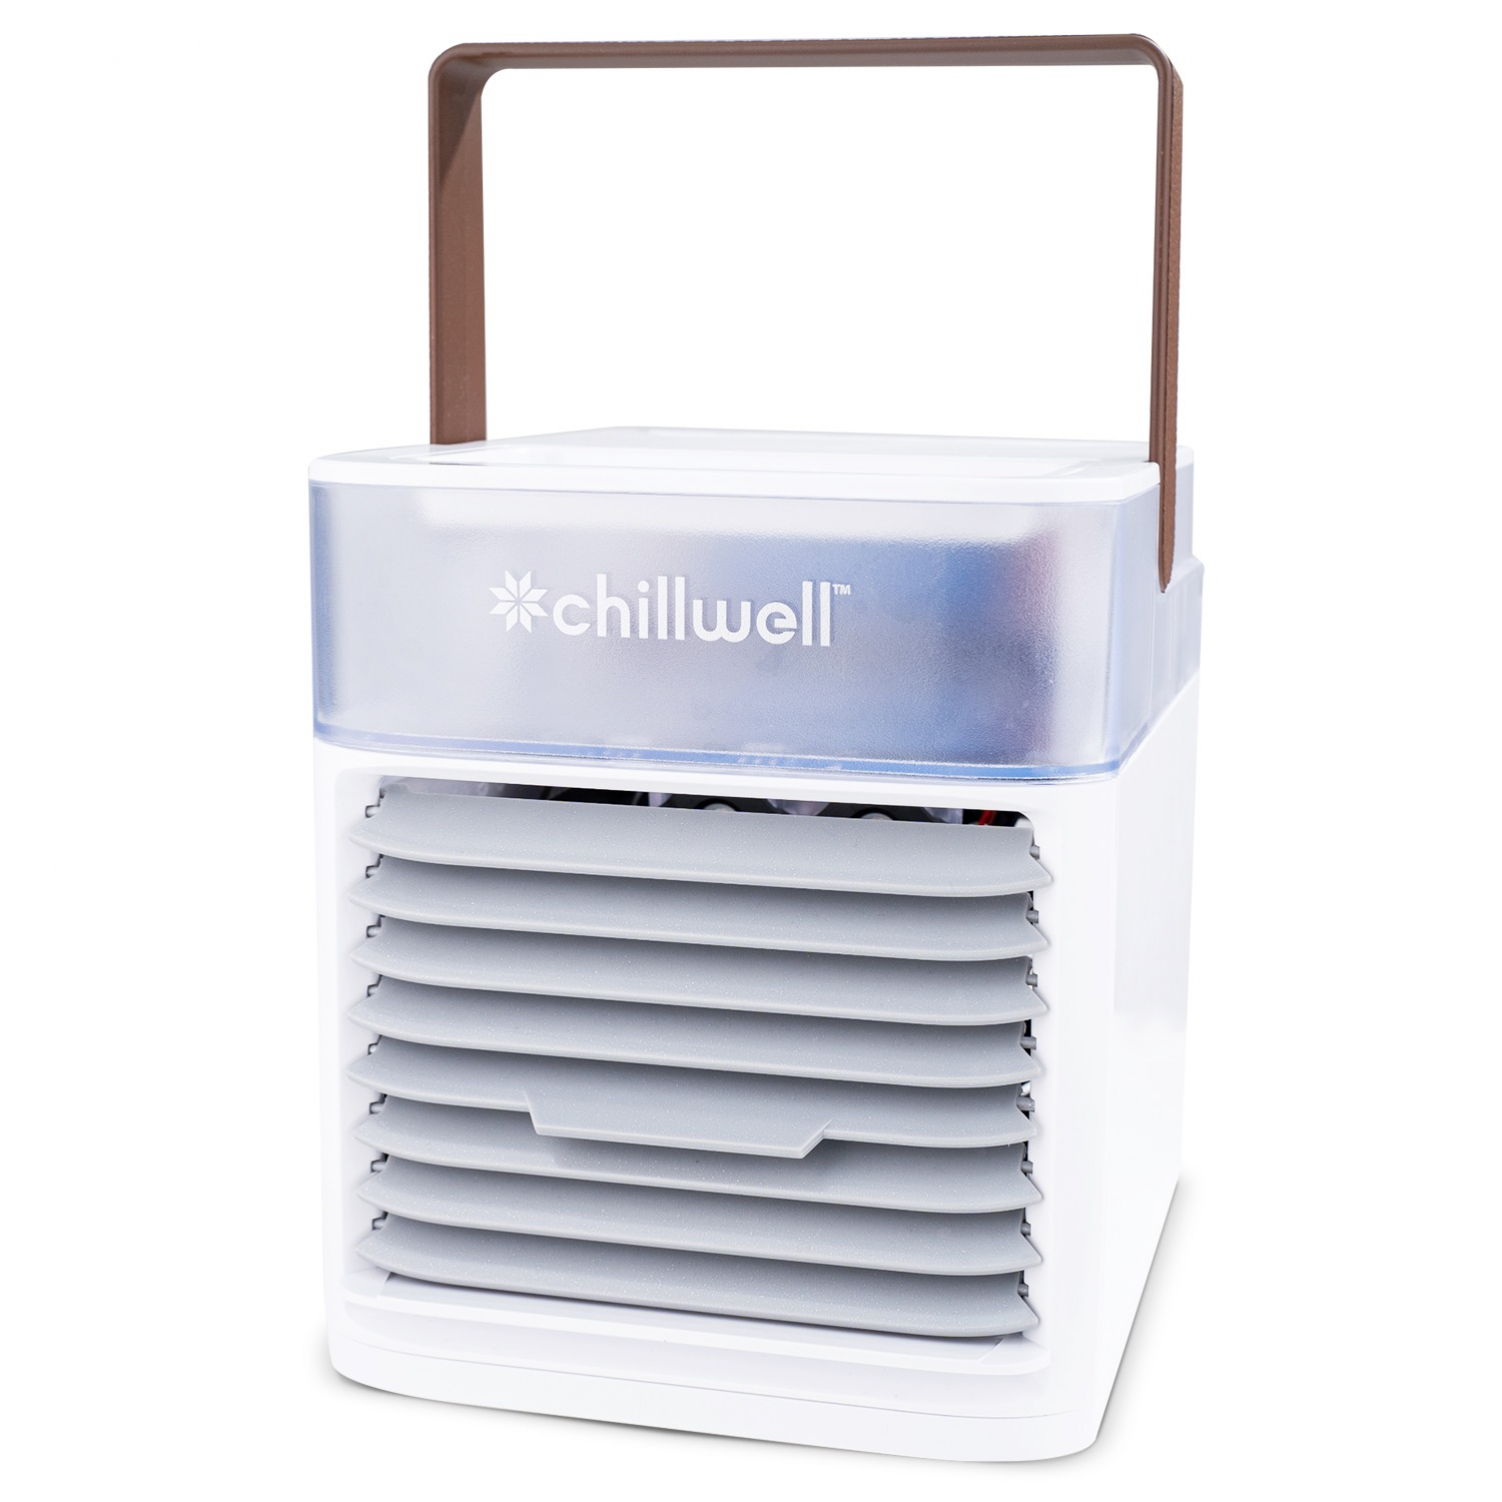 The Chillwell AC Portable Ac